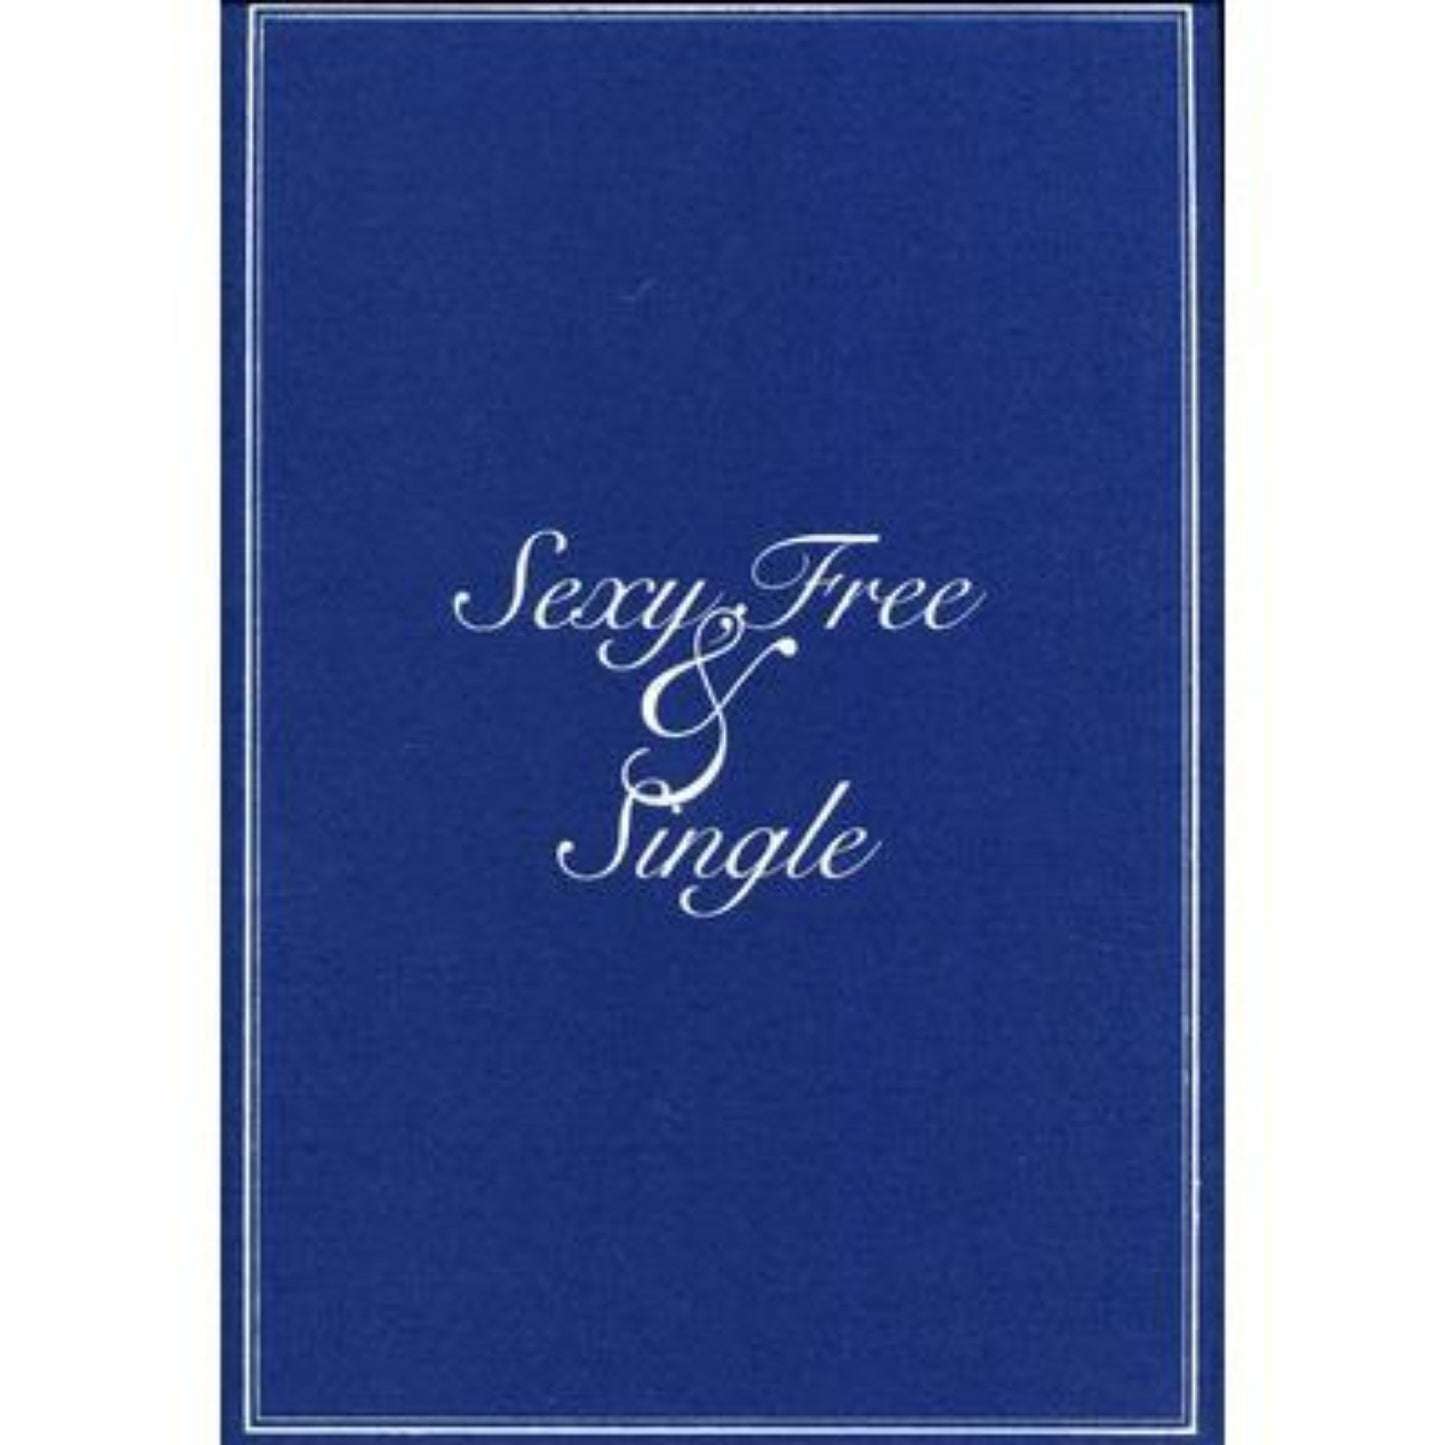 (One) Super Junior -  Sexy Free and Single (Type A)